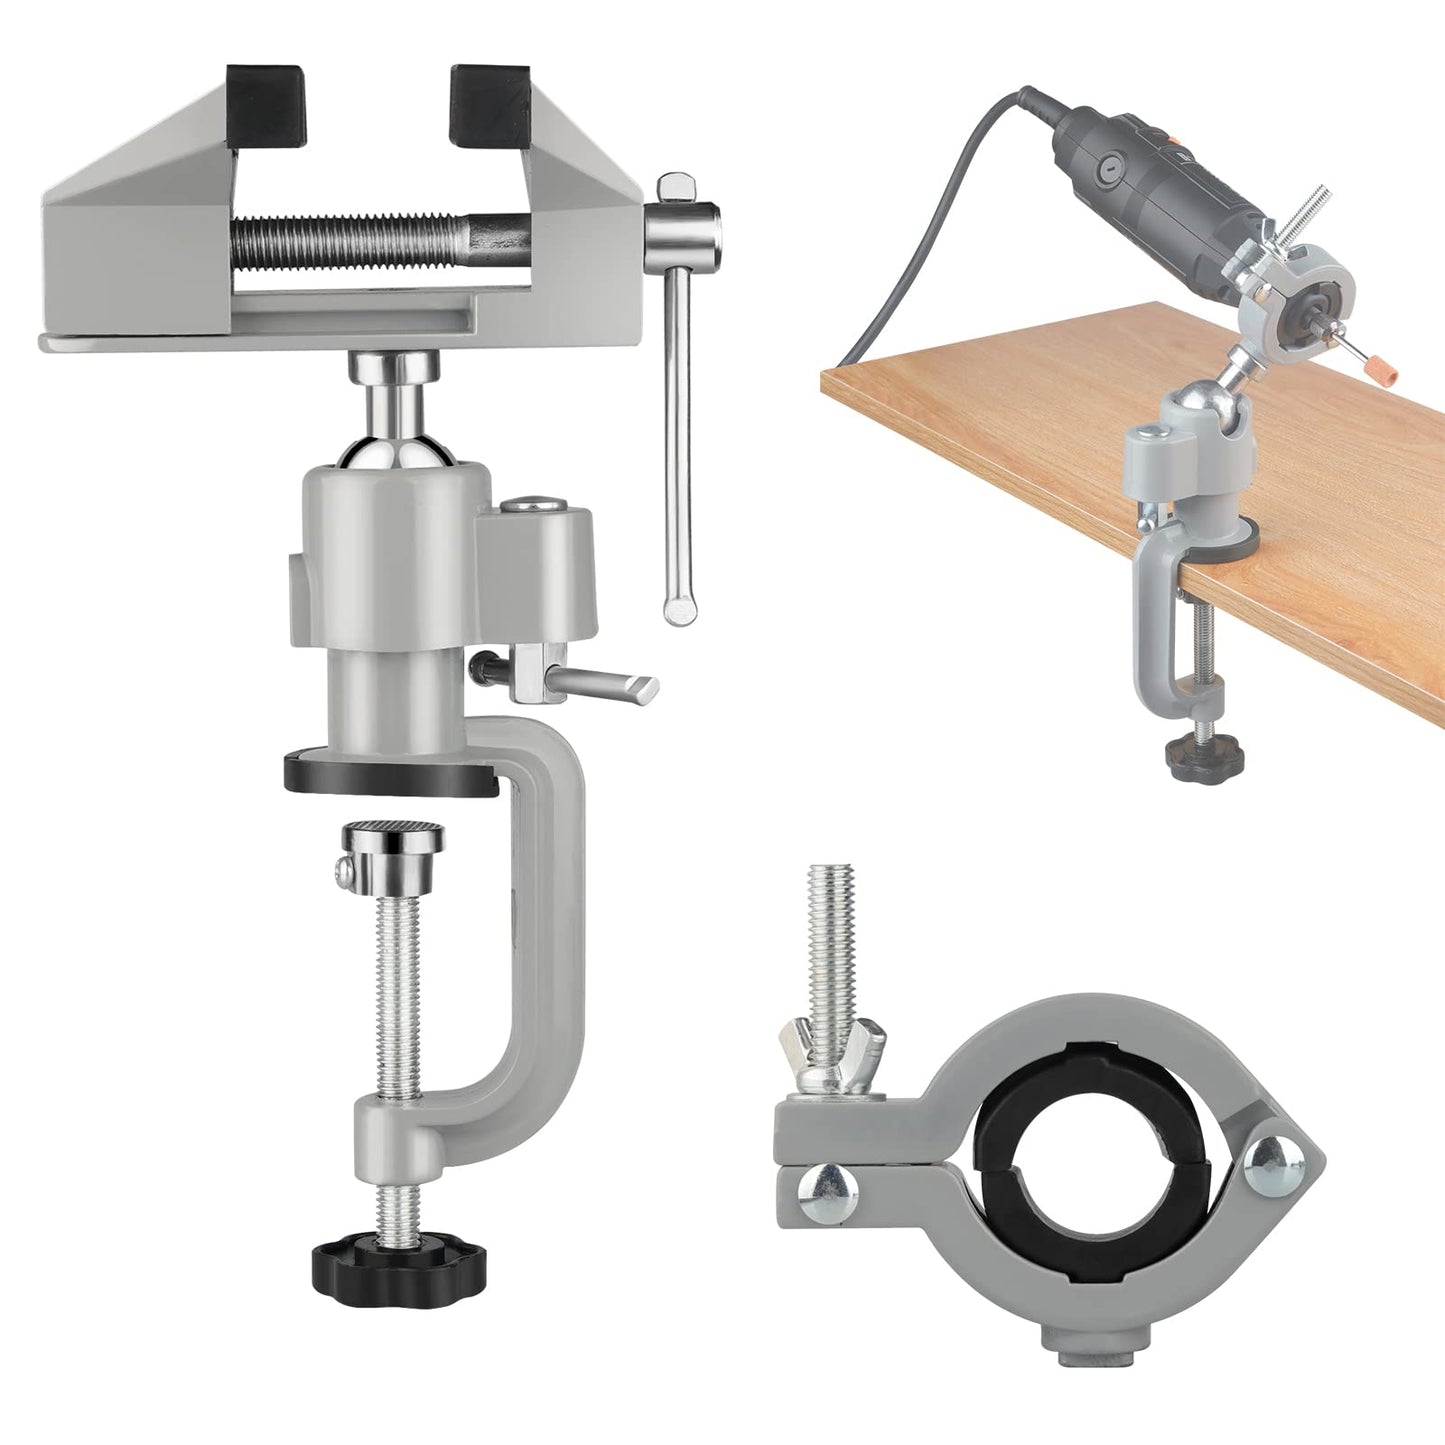 Table Vise,2 in 1 Universal Rotate 360° Work Clamp-On Vise,Table Vice with Electric Drill/Grinder Holder for Woodworking, Drilling, Sawing, Jewelry